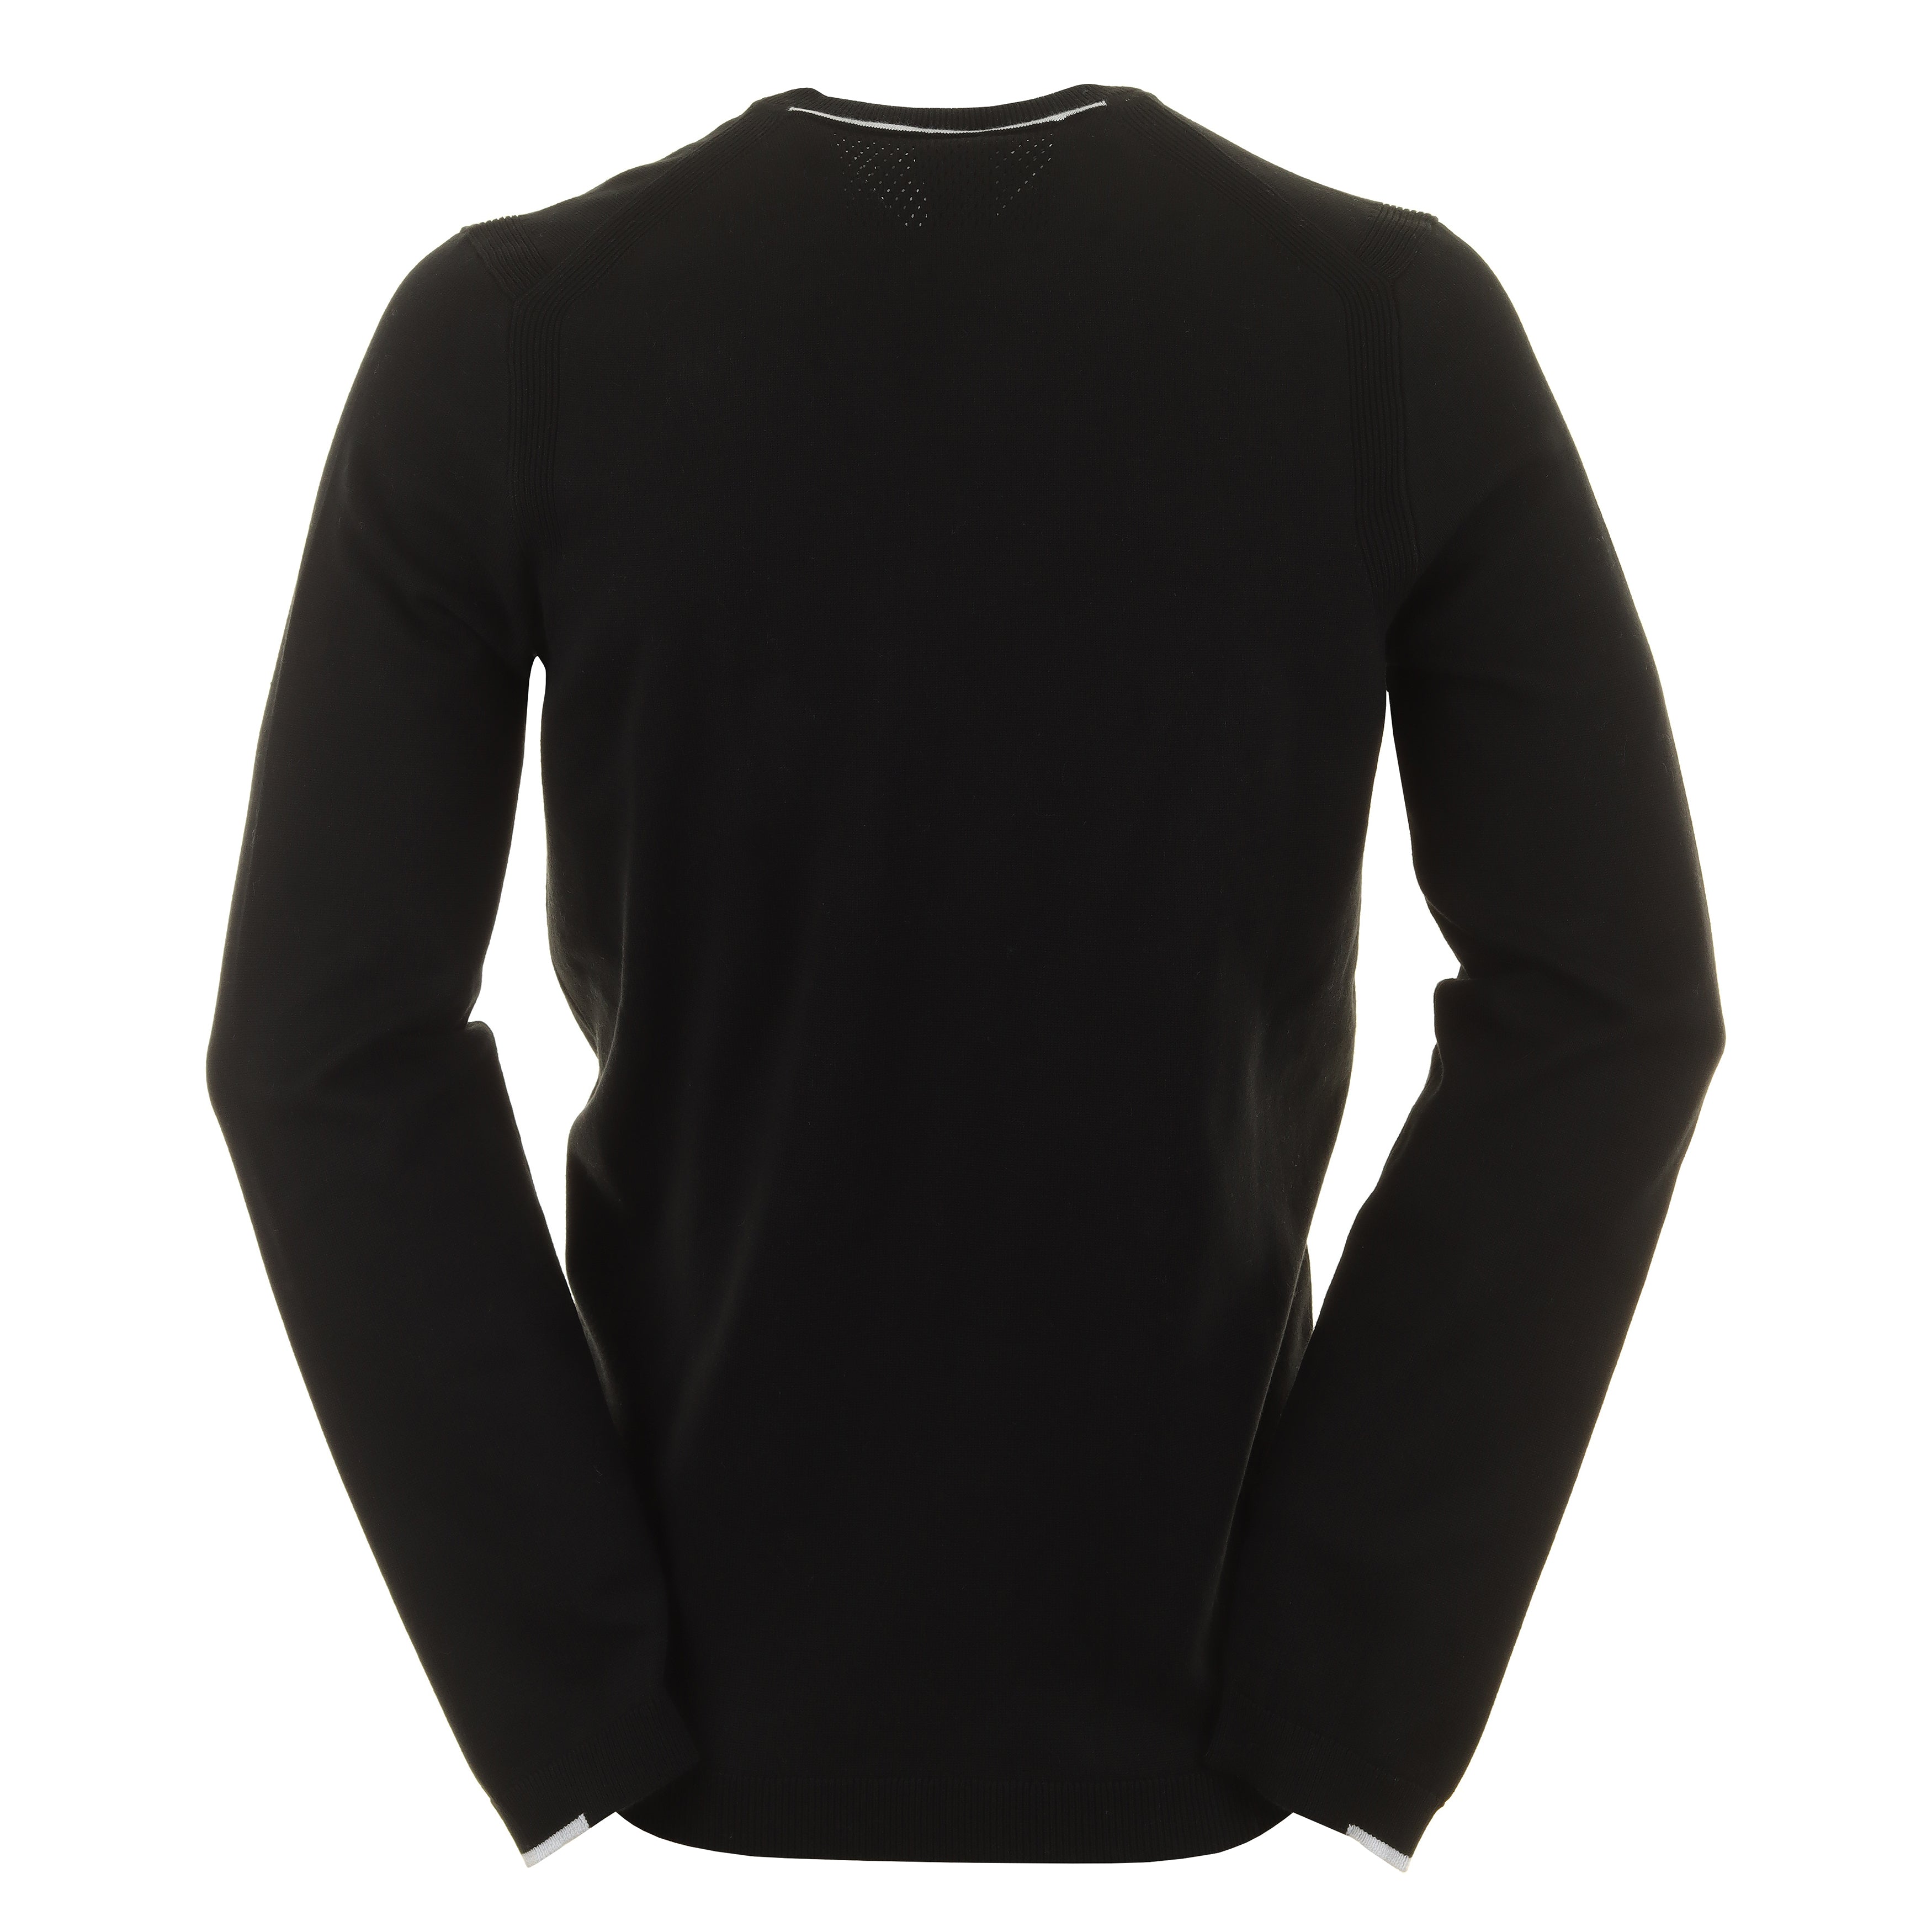 BOSS Ever-X Crew Neck Sweater WI23 50498539 Black 001 | Function18